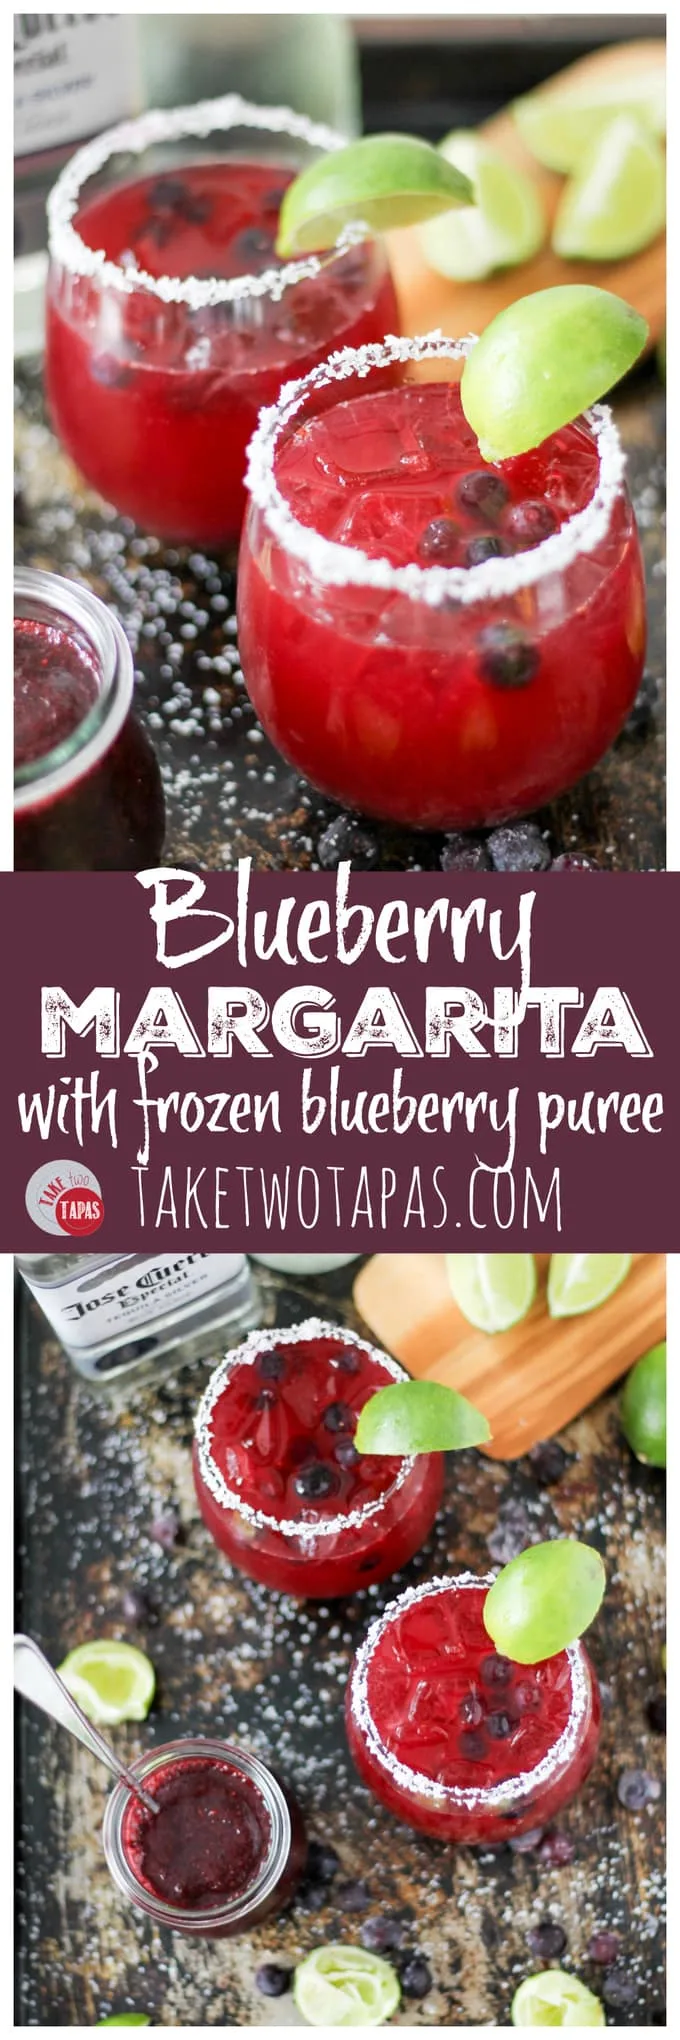 Pinterest collage image with text "Blueberry Margarita with frozen blueberry puree"